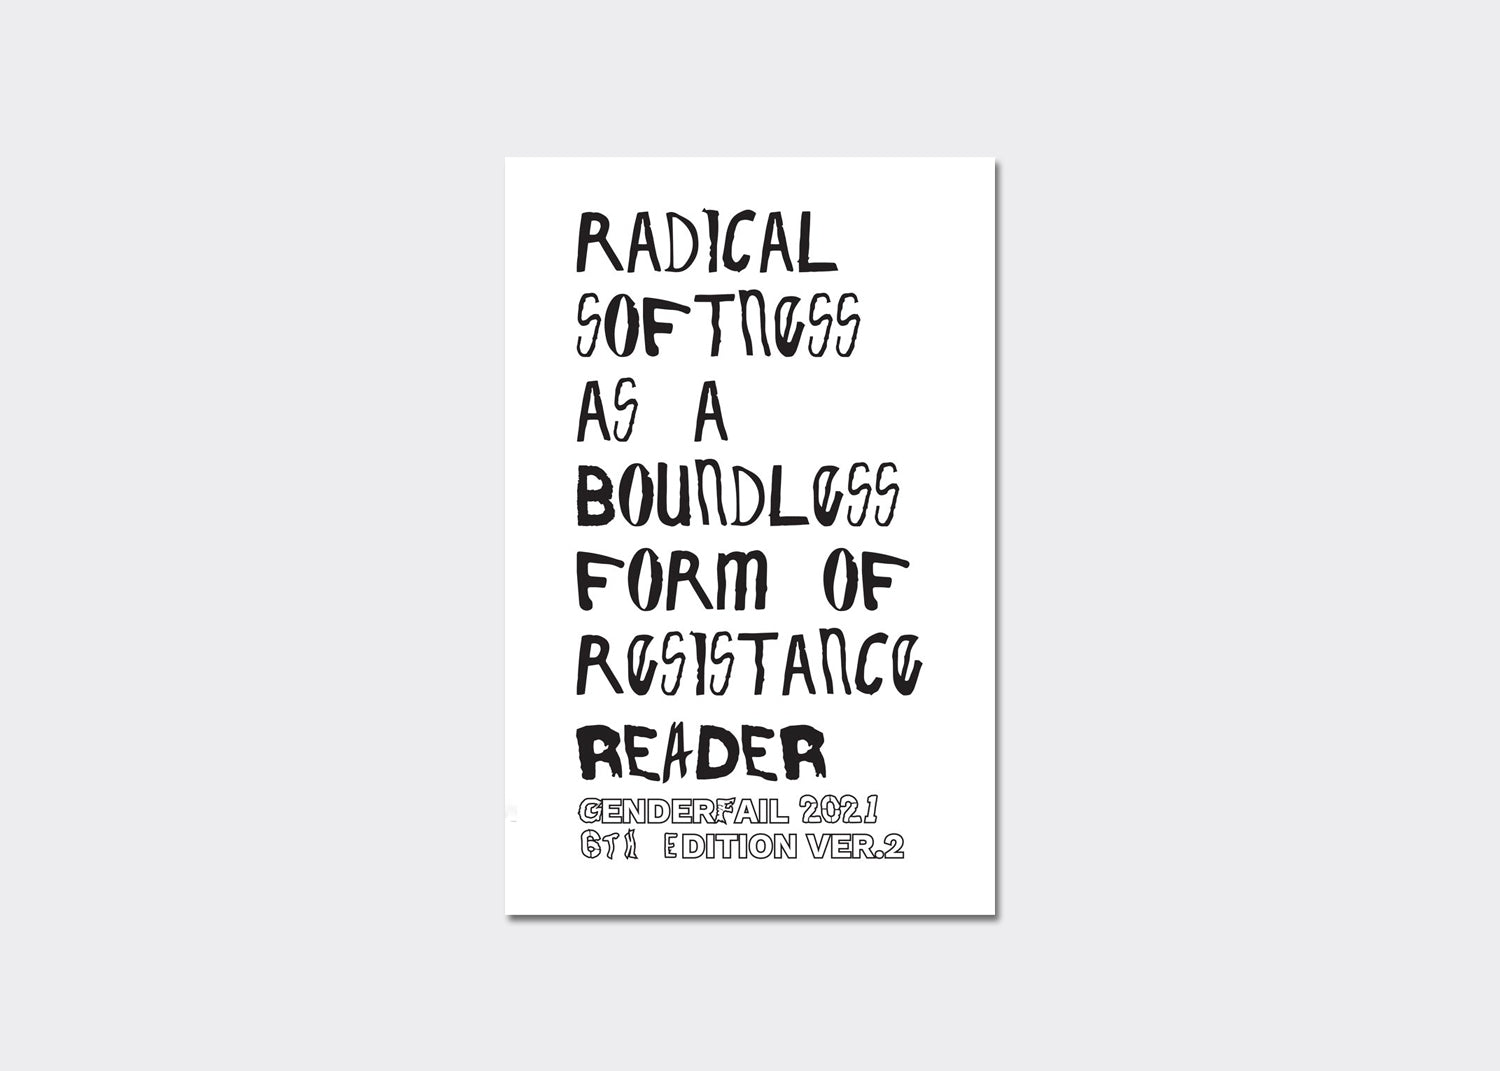 Radical Softness as a Boundless Form of Resistance Reader